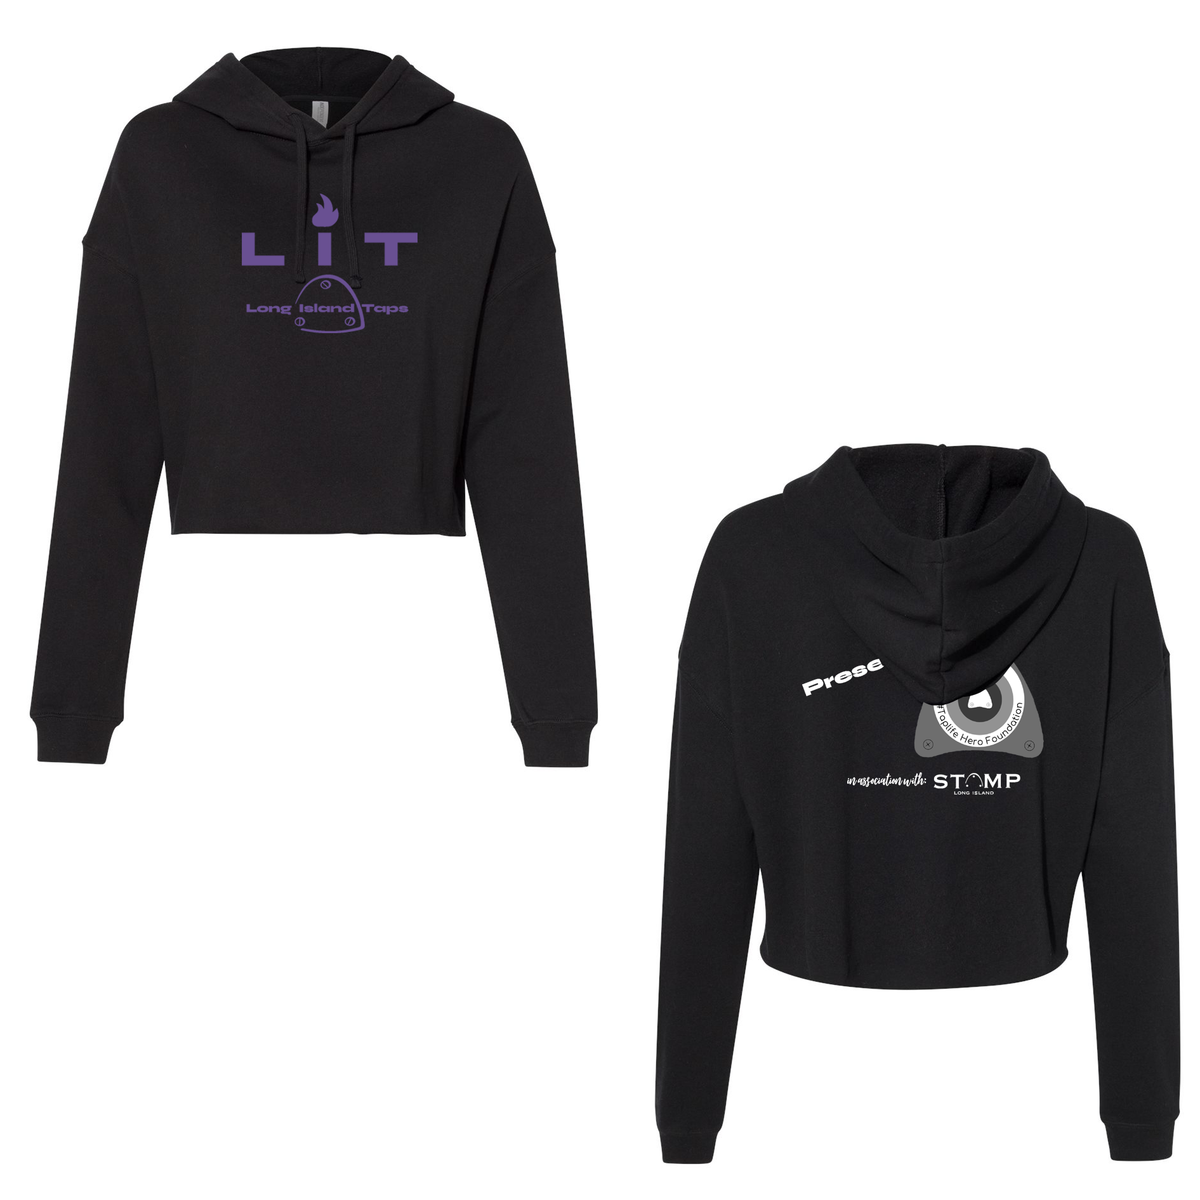 LIT Independent Trading Co. Women’s Cropped Hoodie